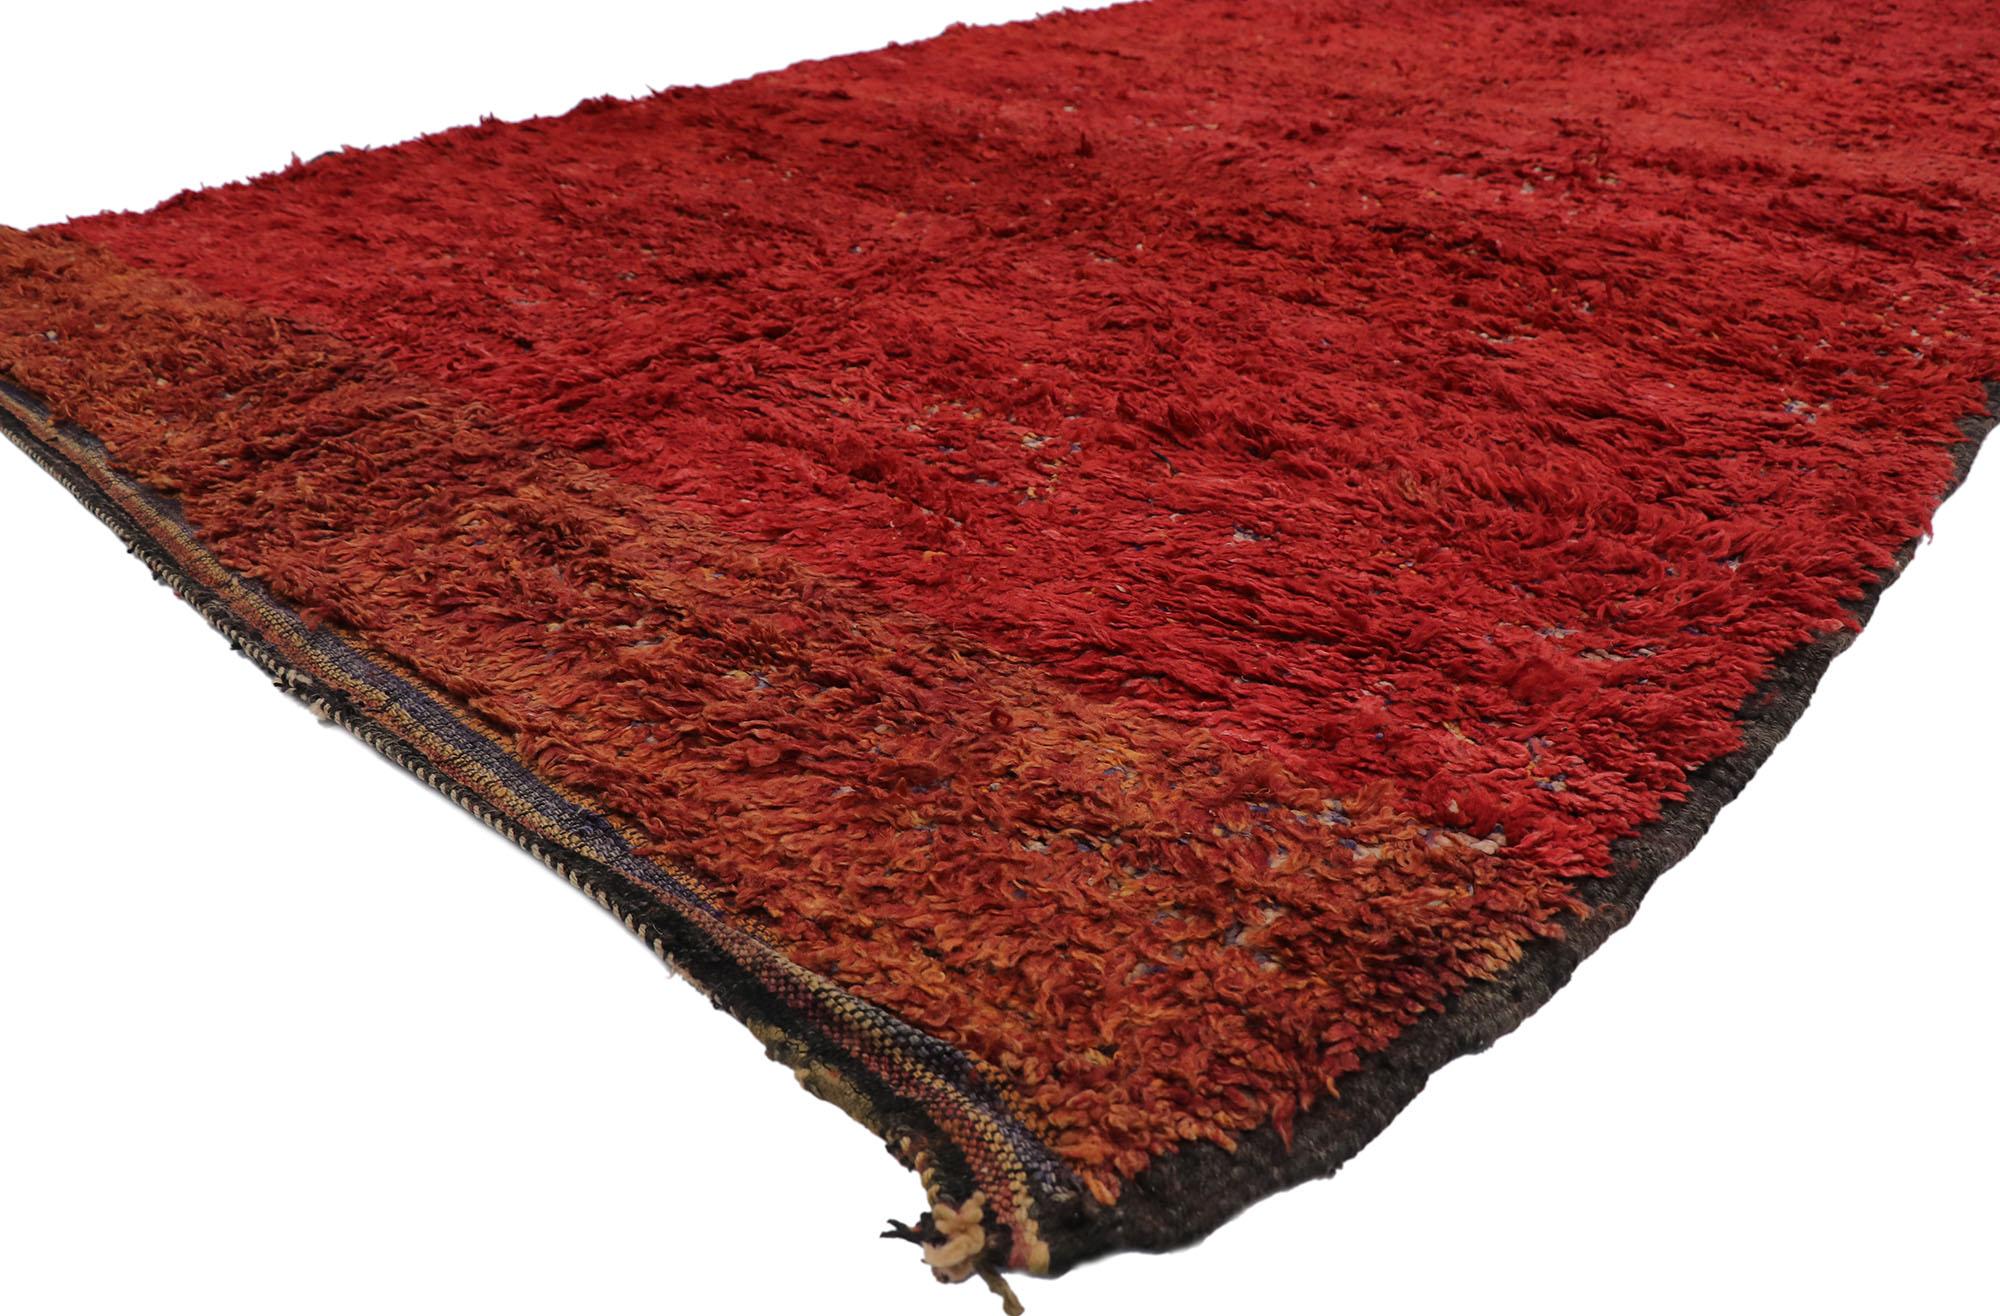 21208 Vintage Berber Red Beni M'Guild Moroccan rug with Tribal Style 07'01 x 13'00. With its simplicity, plush pile and tribal style, this hand knotted wool vintage Beni M'Guild Moroccan rug is a captivating vision of woven beauty. The abrashed red